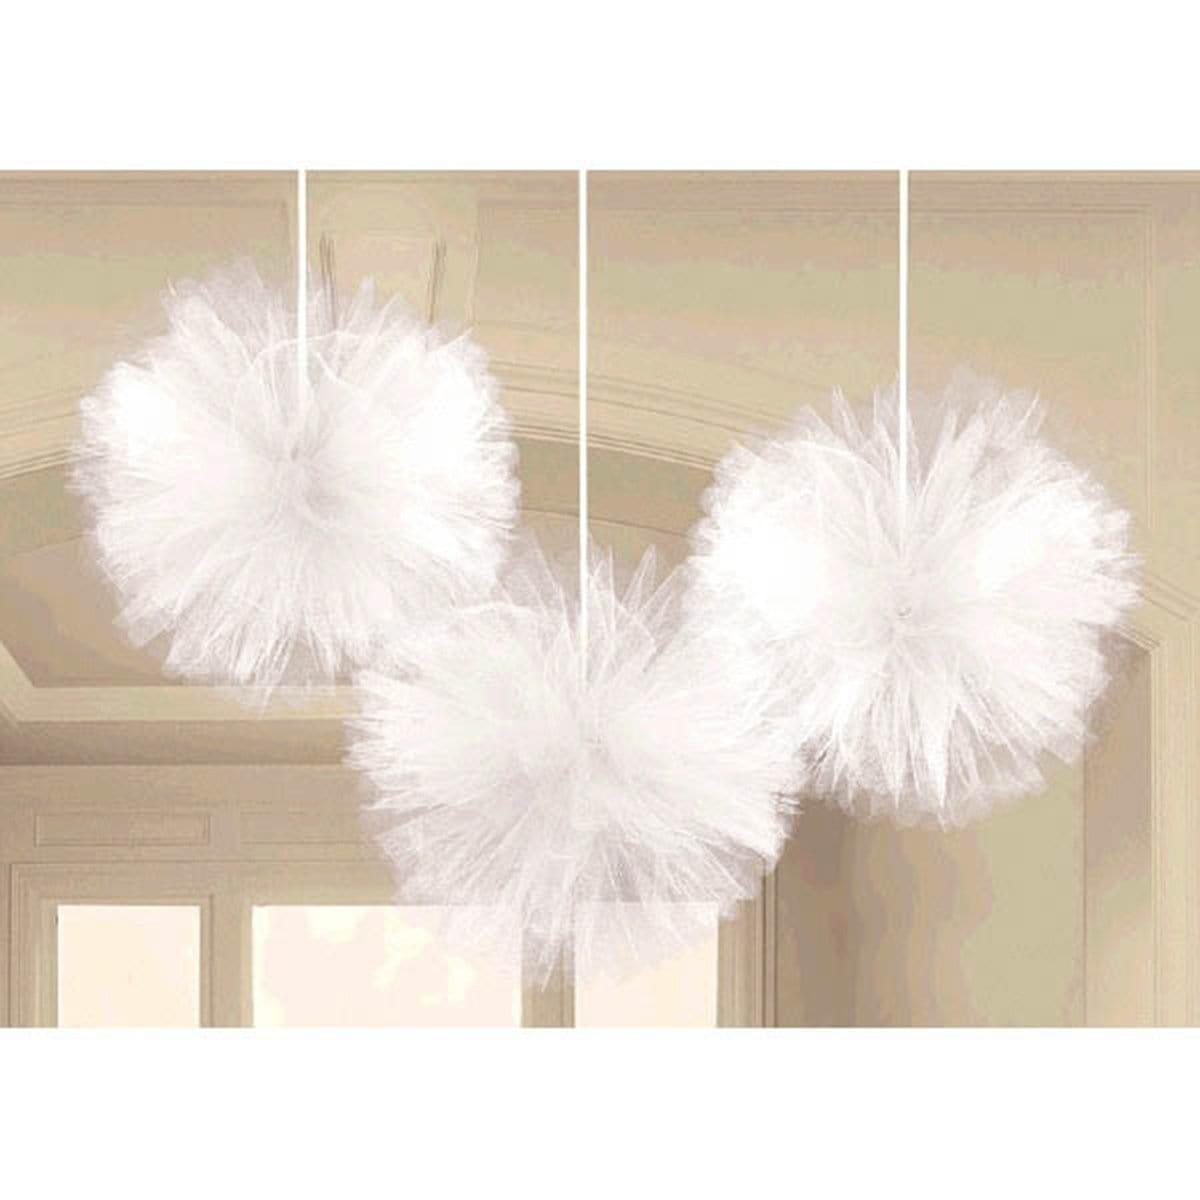 Buy Decorations Deluxe Tulle Fluffy Decoration, White, 3 Count sold at Party Expert